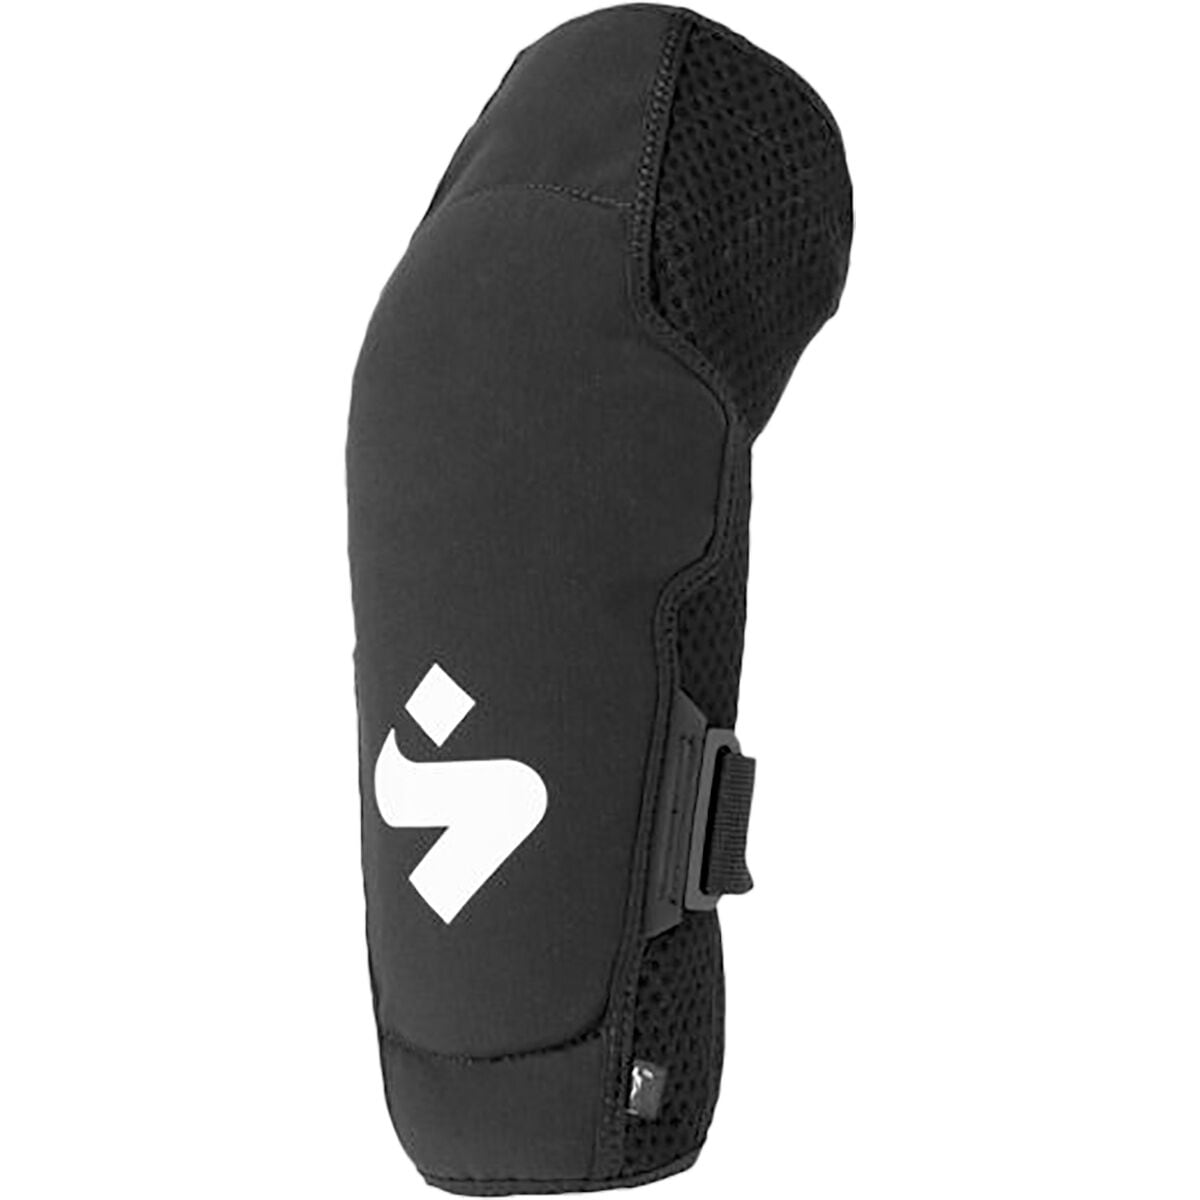 Sweet Protection Pro Knee Guards Black, XL